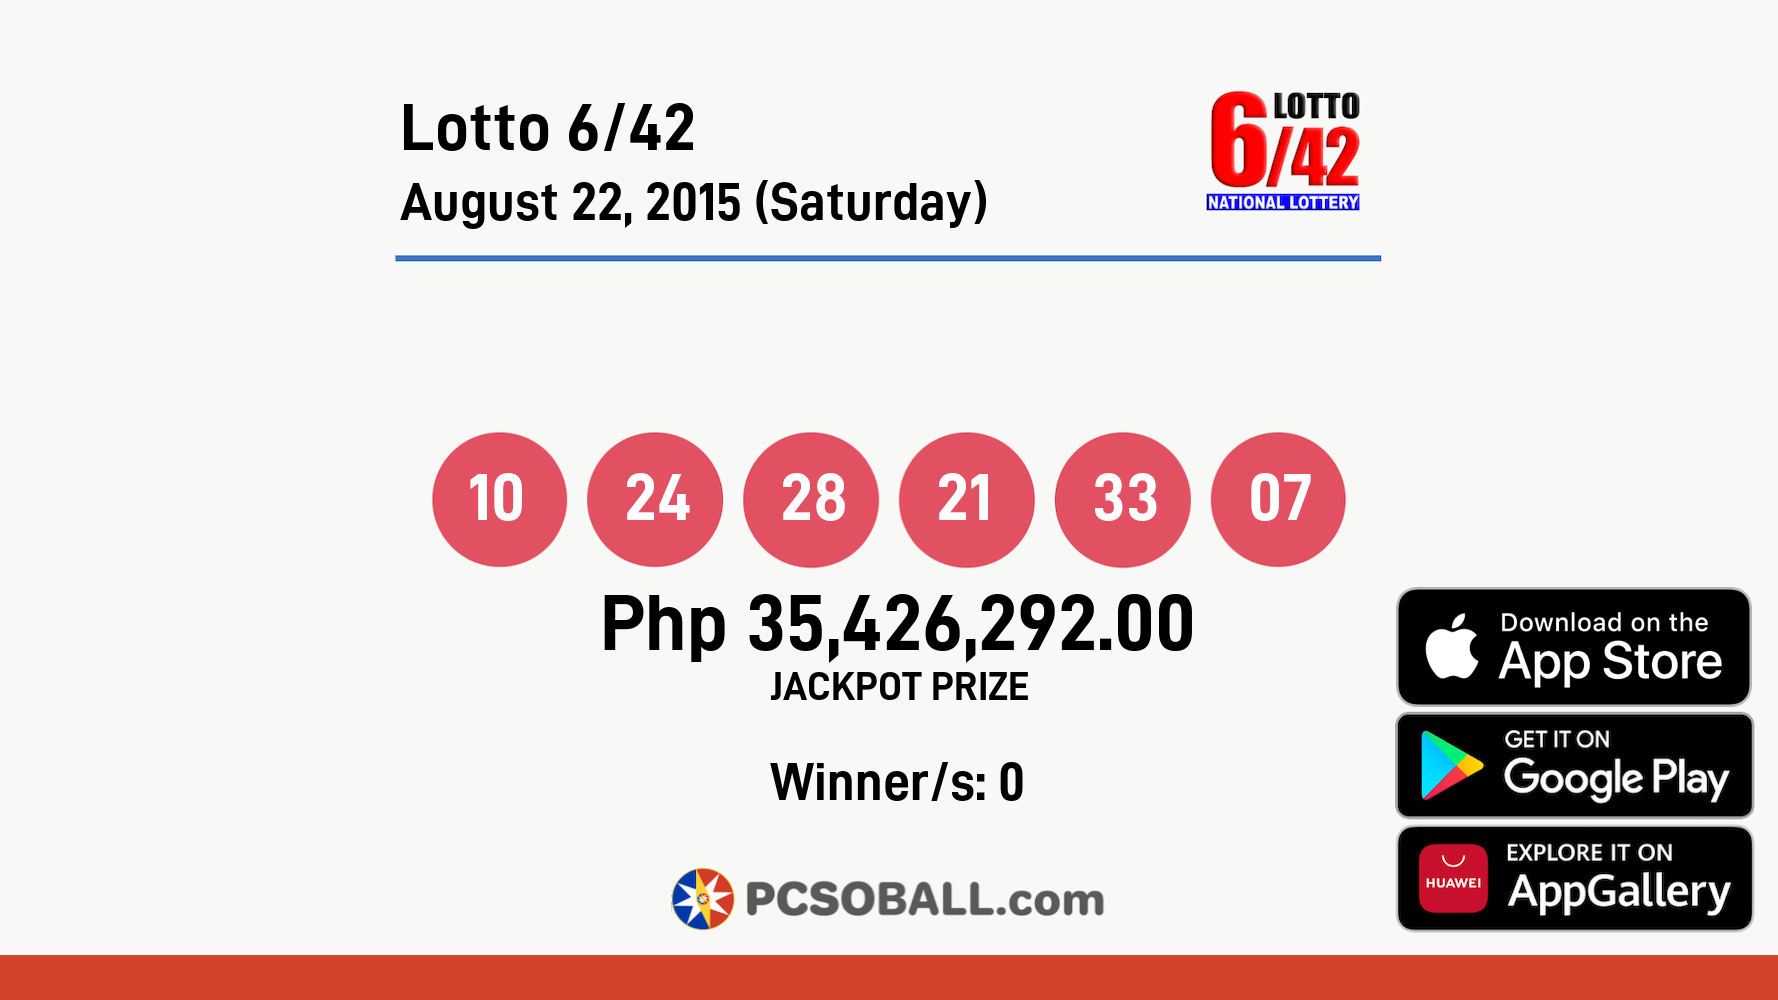 Lotto 6/42 August 22, 2015 (Saturday) Result